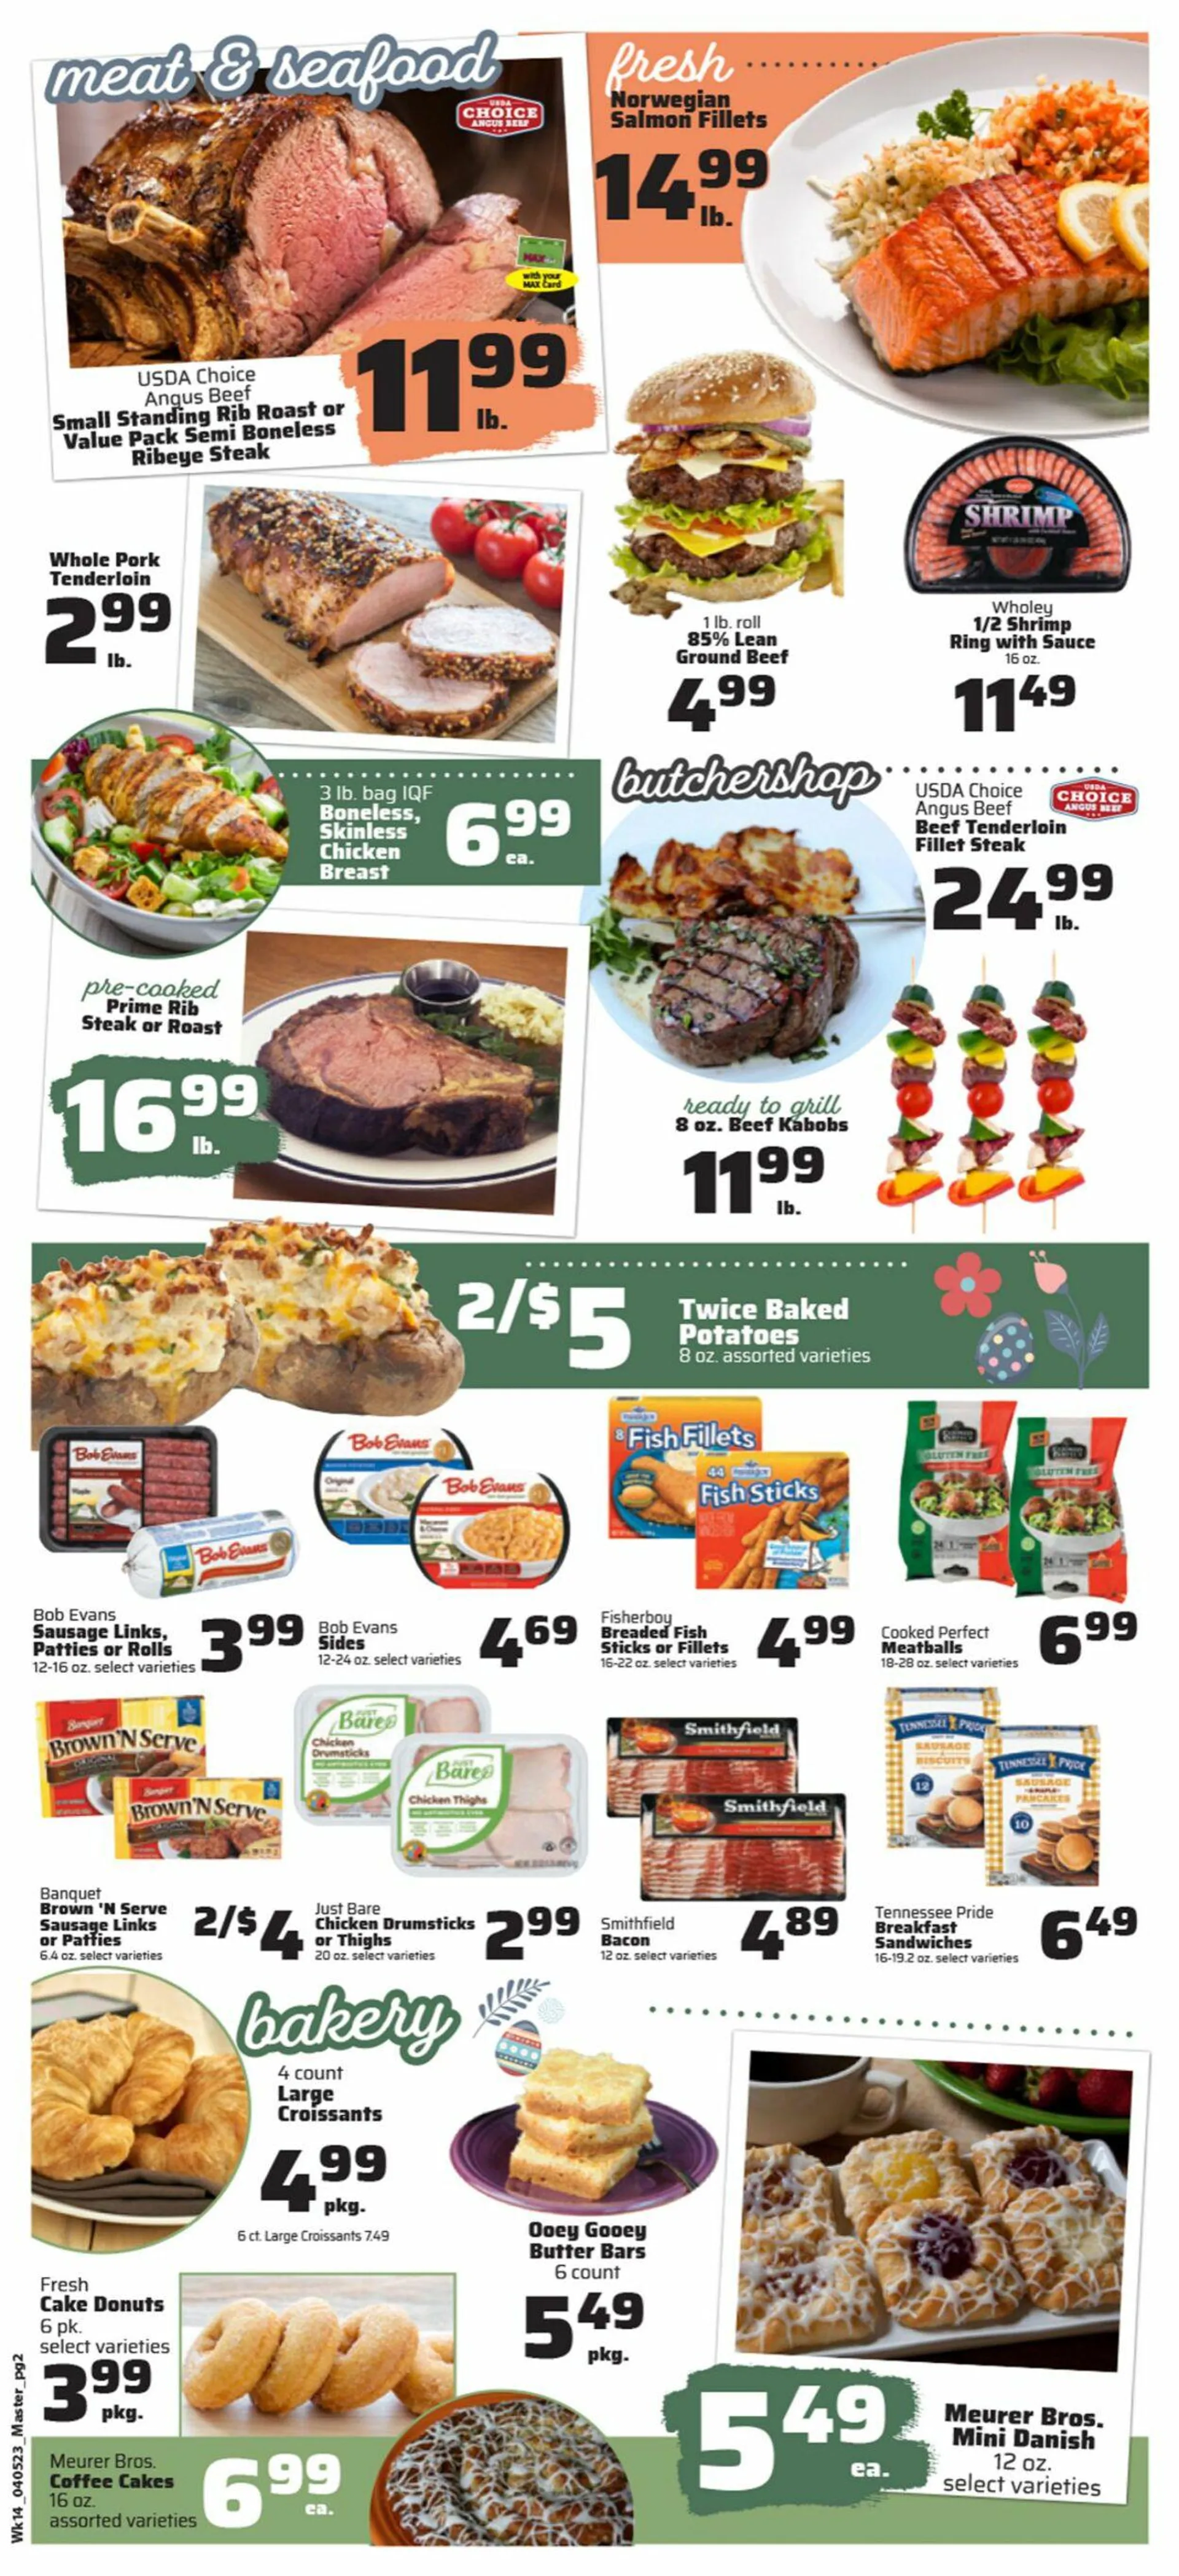 County Market Current weekly ad - 2